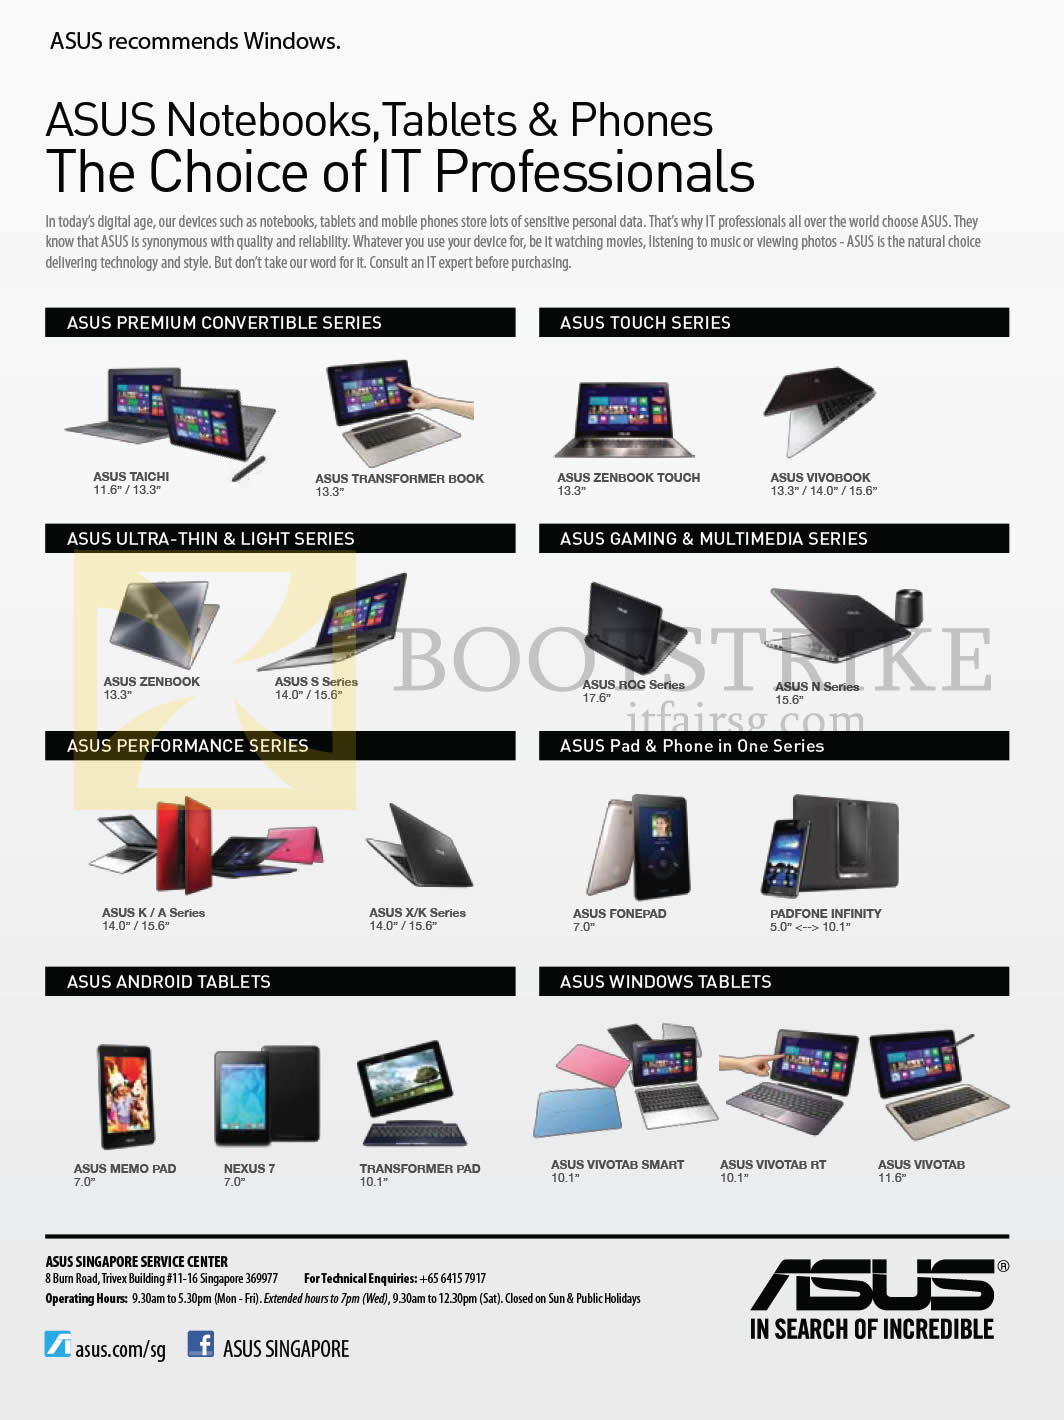 COMEX 2013 price list image brochure of ASUS About Notebooks, Tablets, Phones